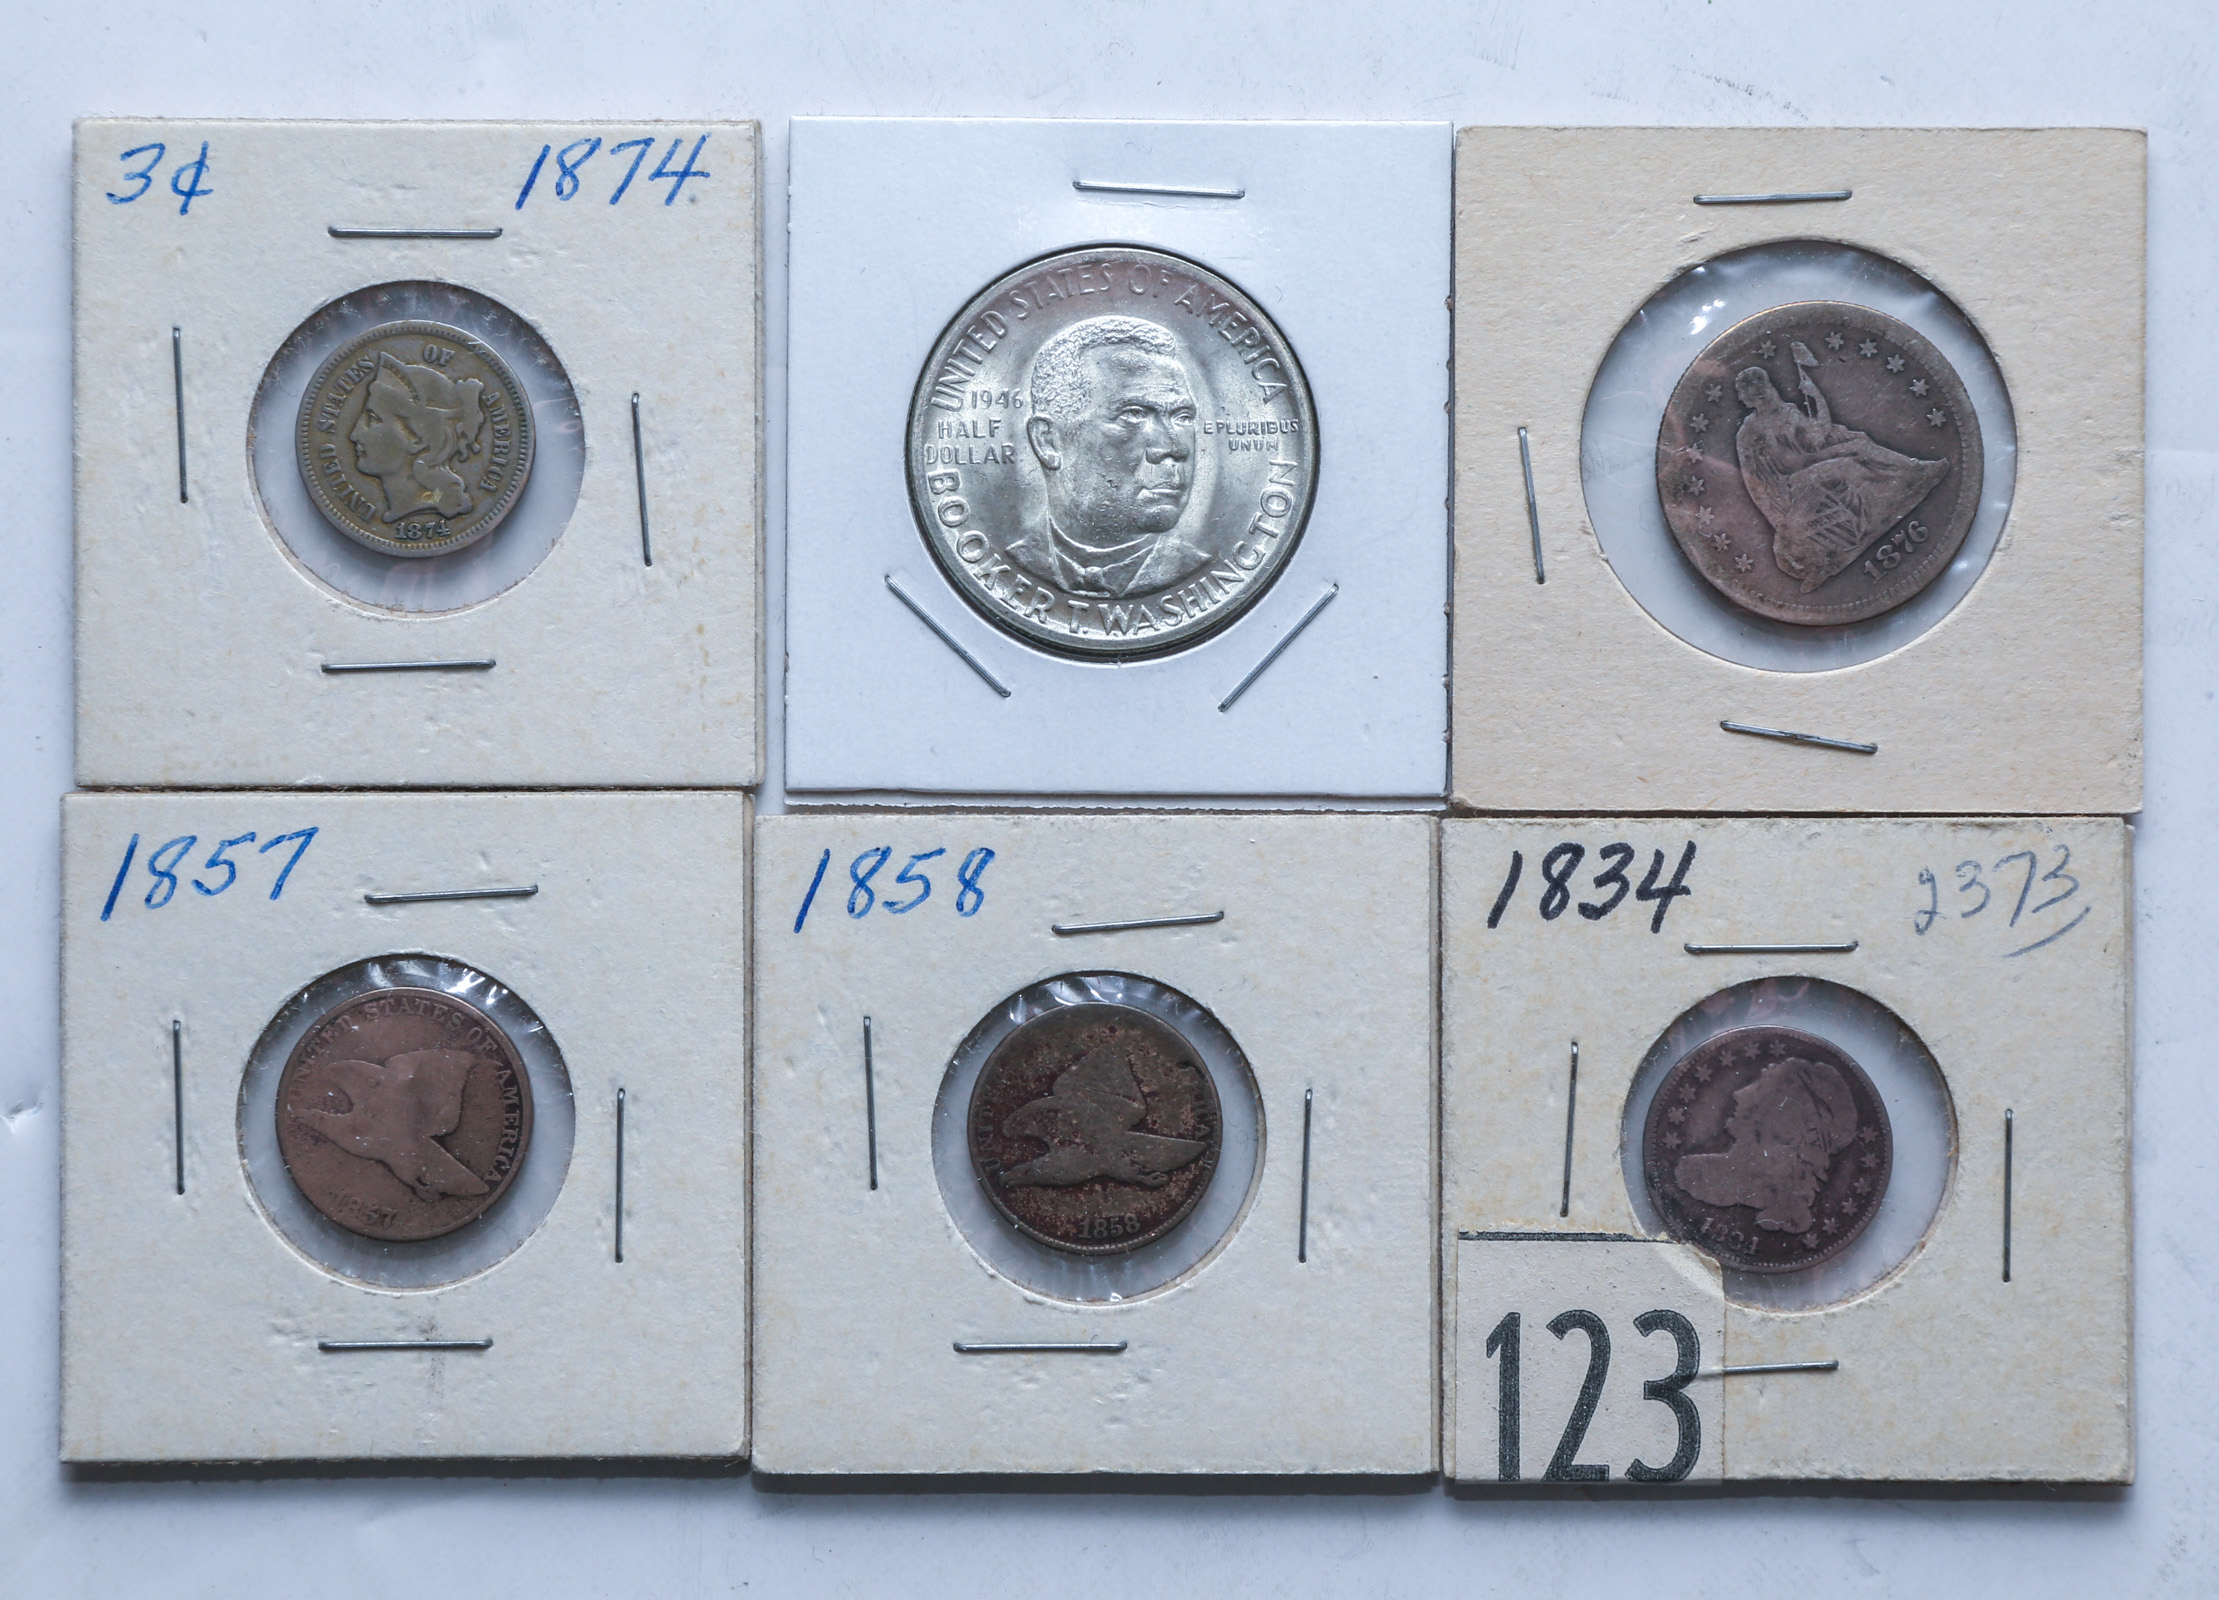 SIX US TYPE COINS 1834 Bust Dime  3cafad